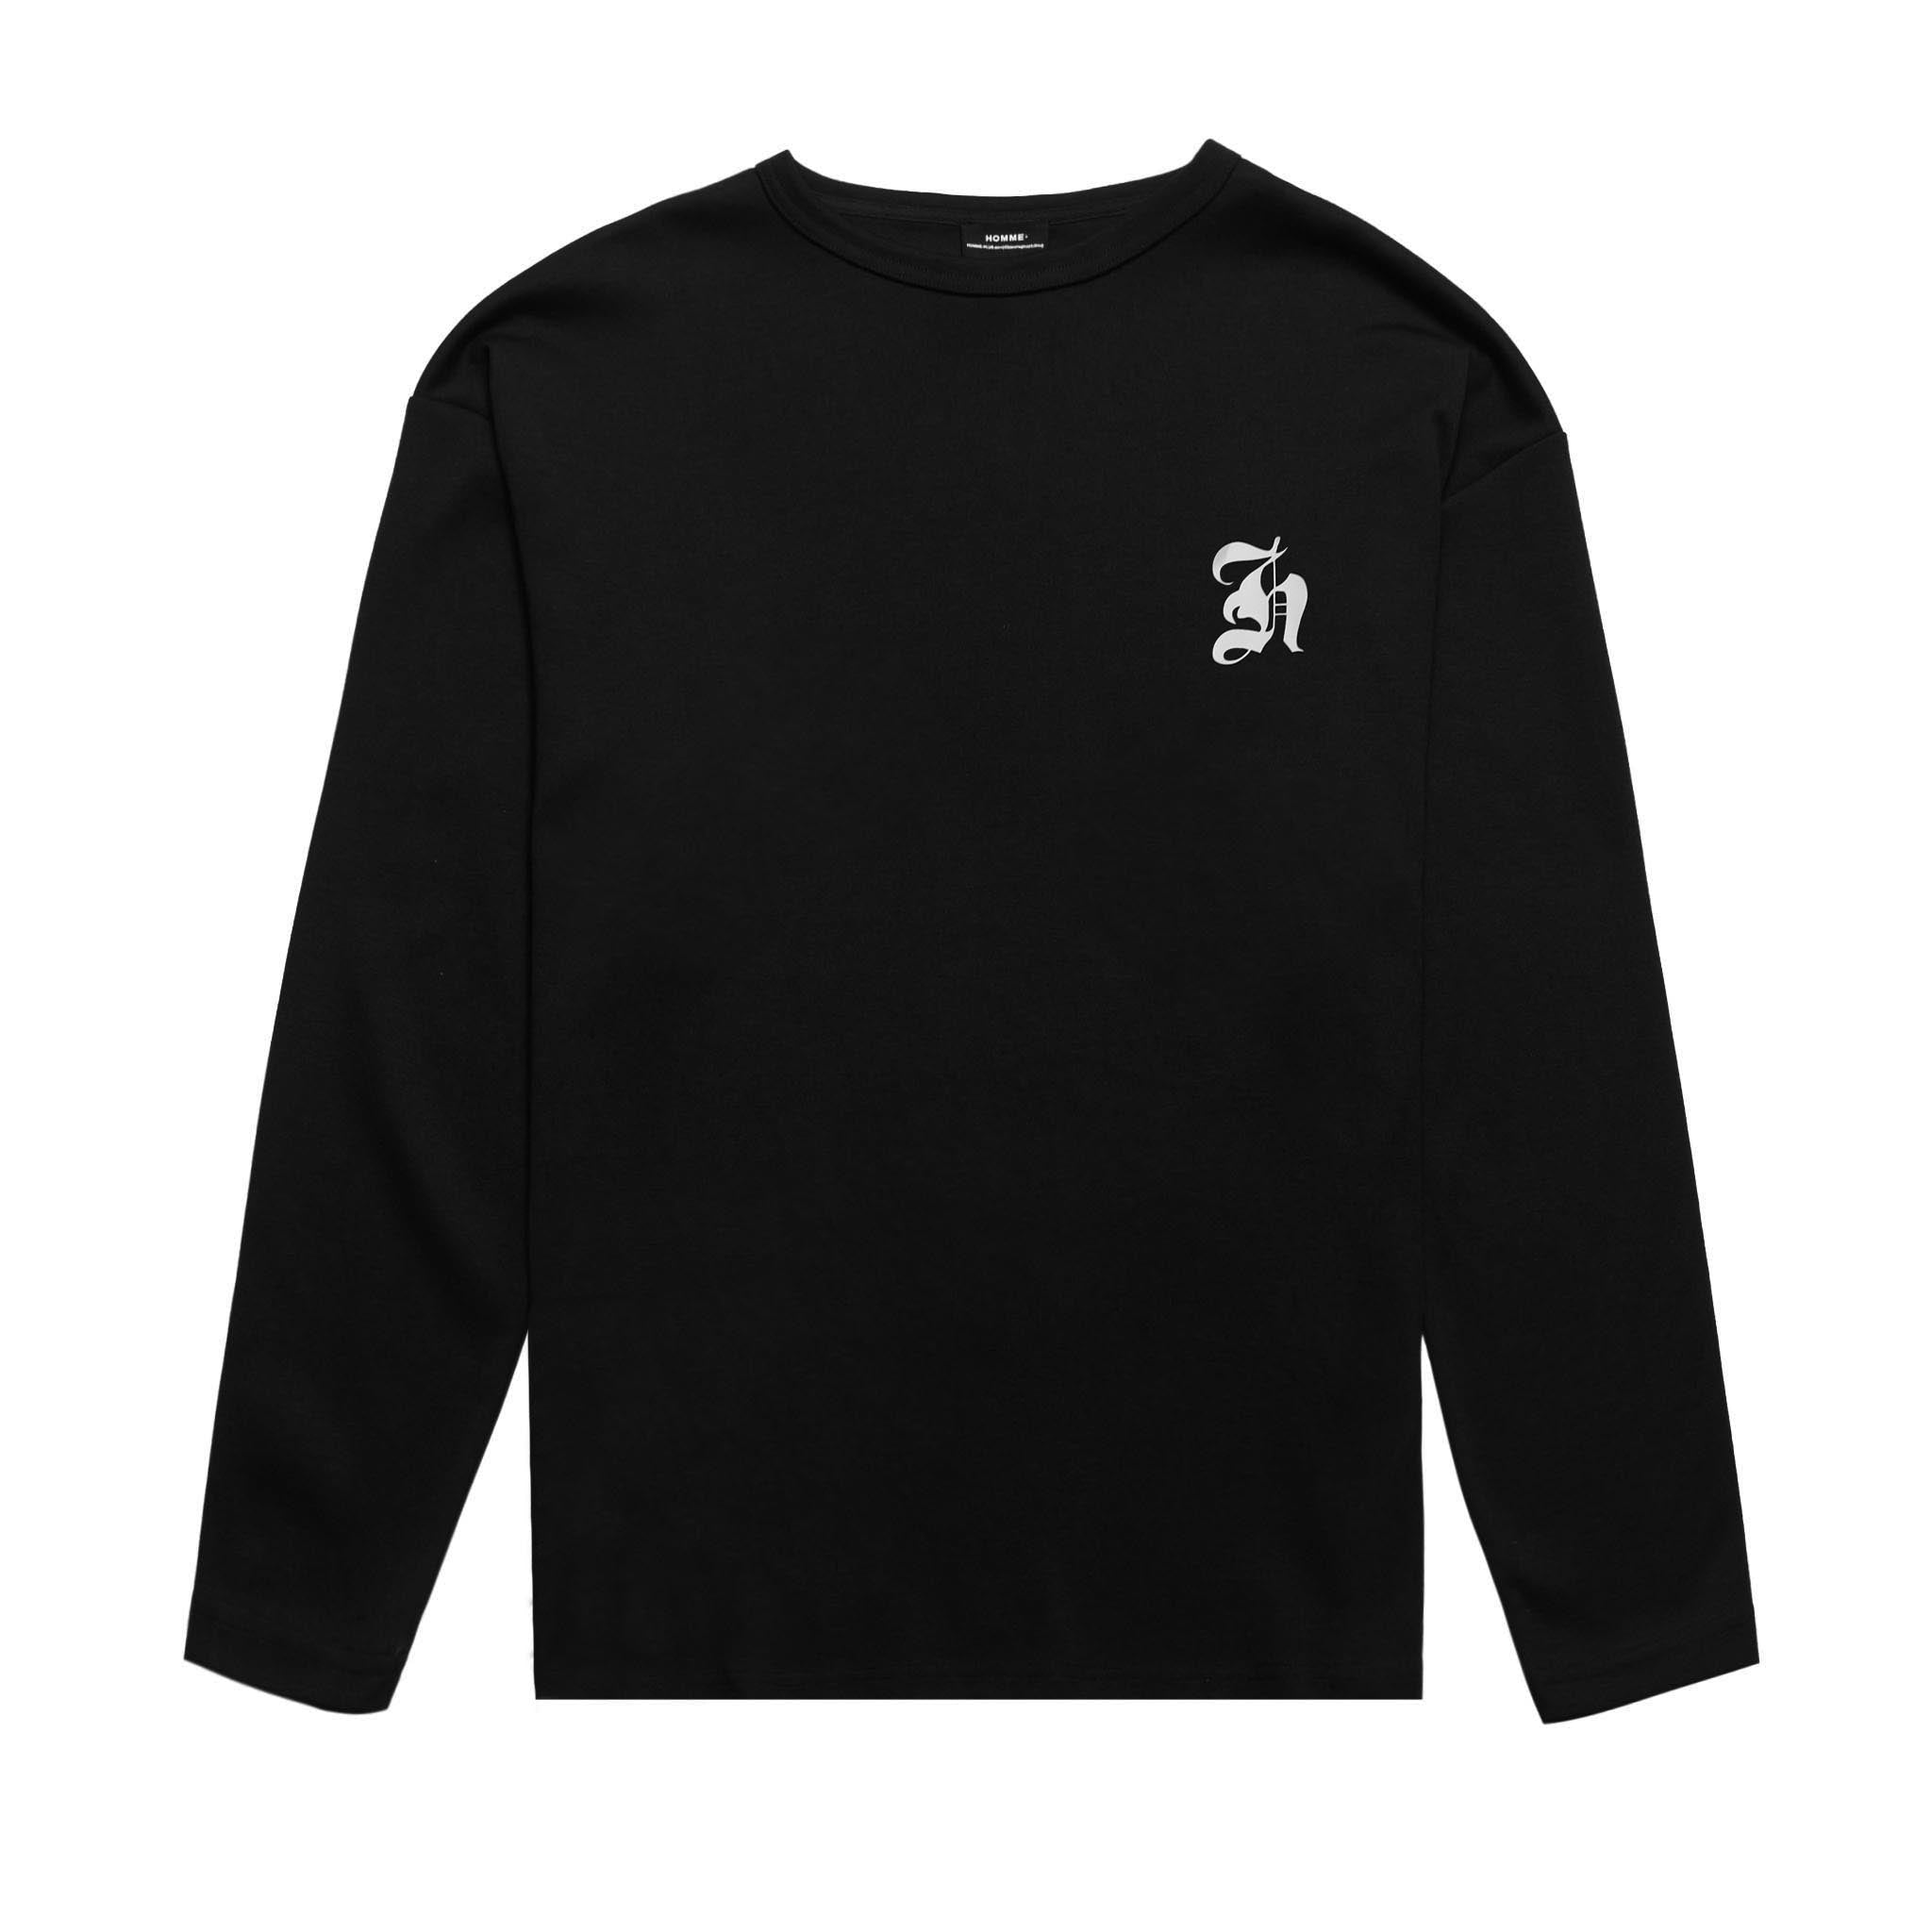 HOMME+ Old English Script L/S Tee Black